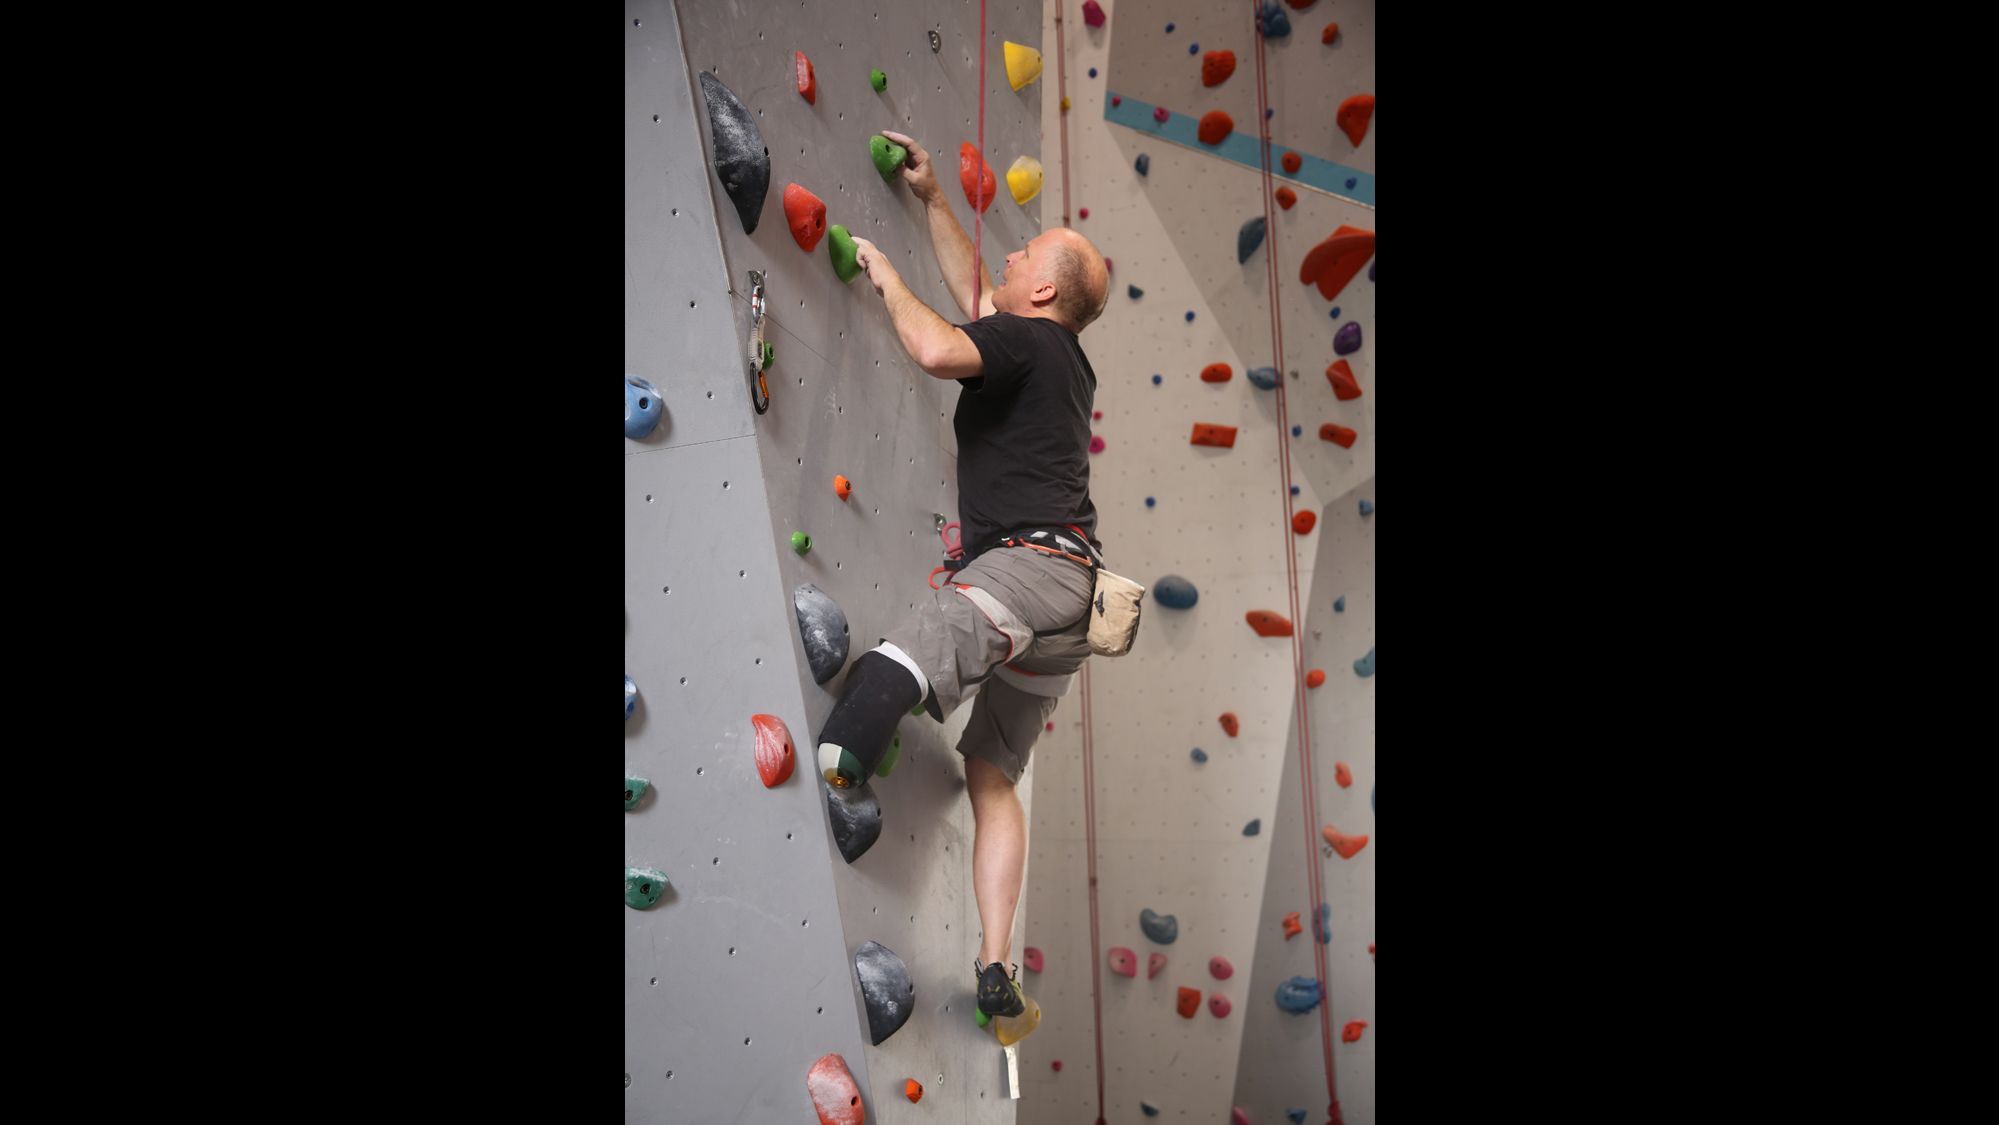 Jim Ewing is rock climbing again after an experimental surgery that could change the future of amputation.